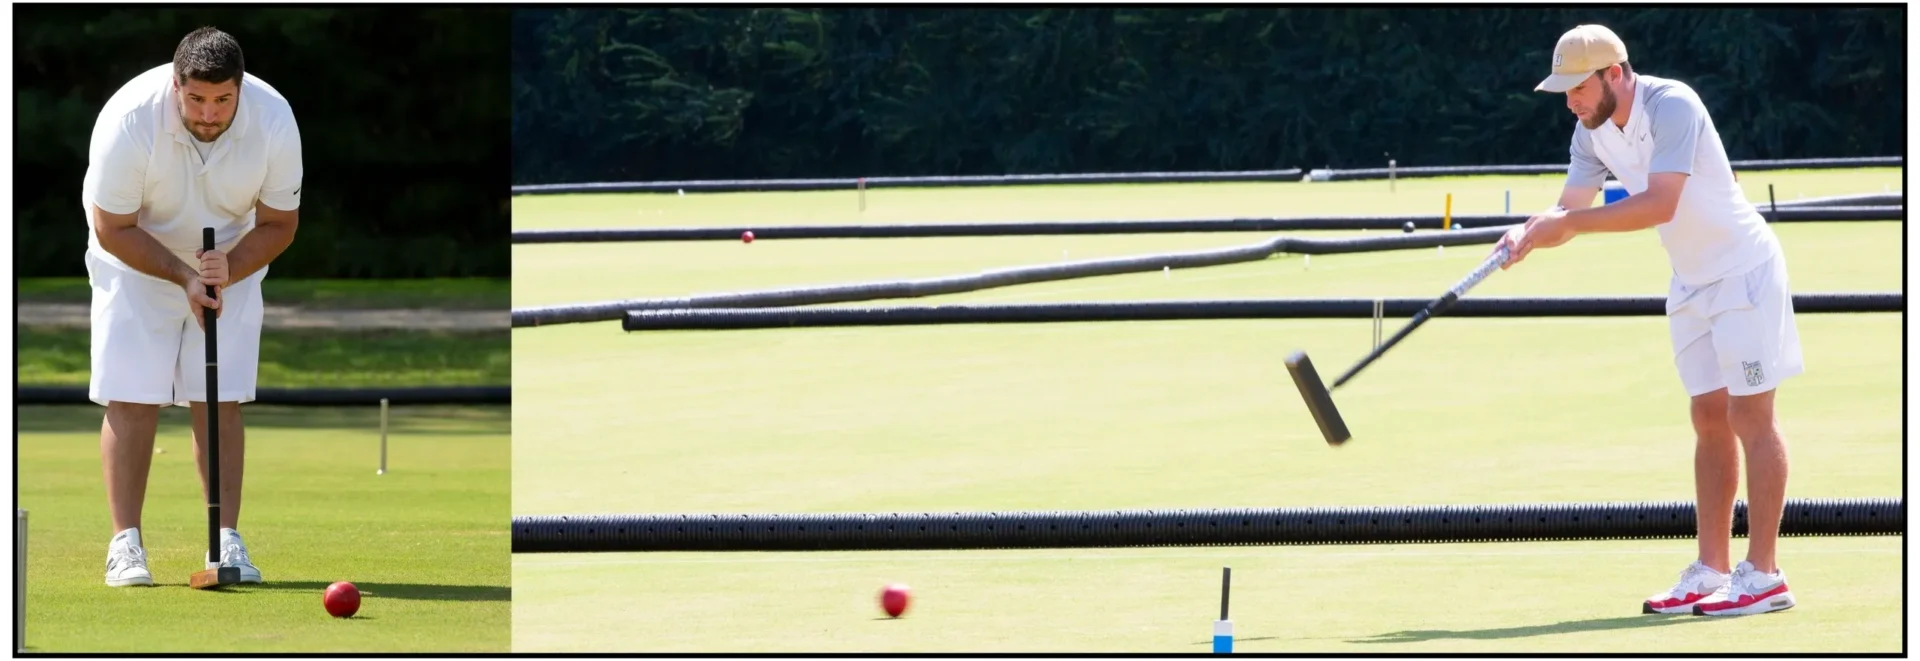 A field with many pipes and balls on it